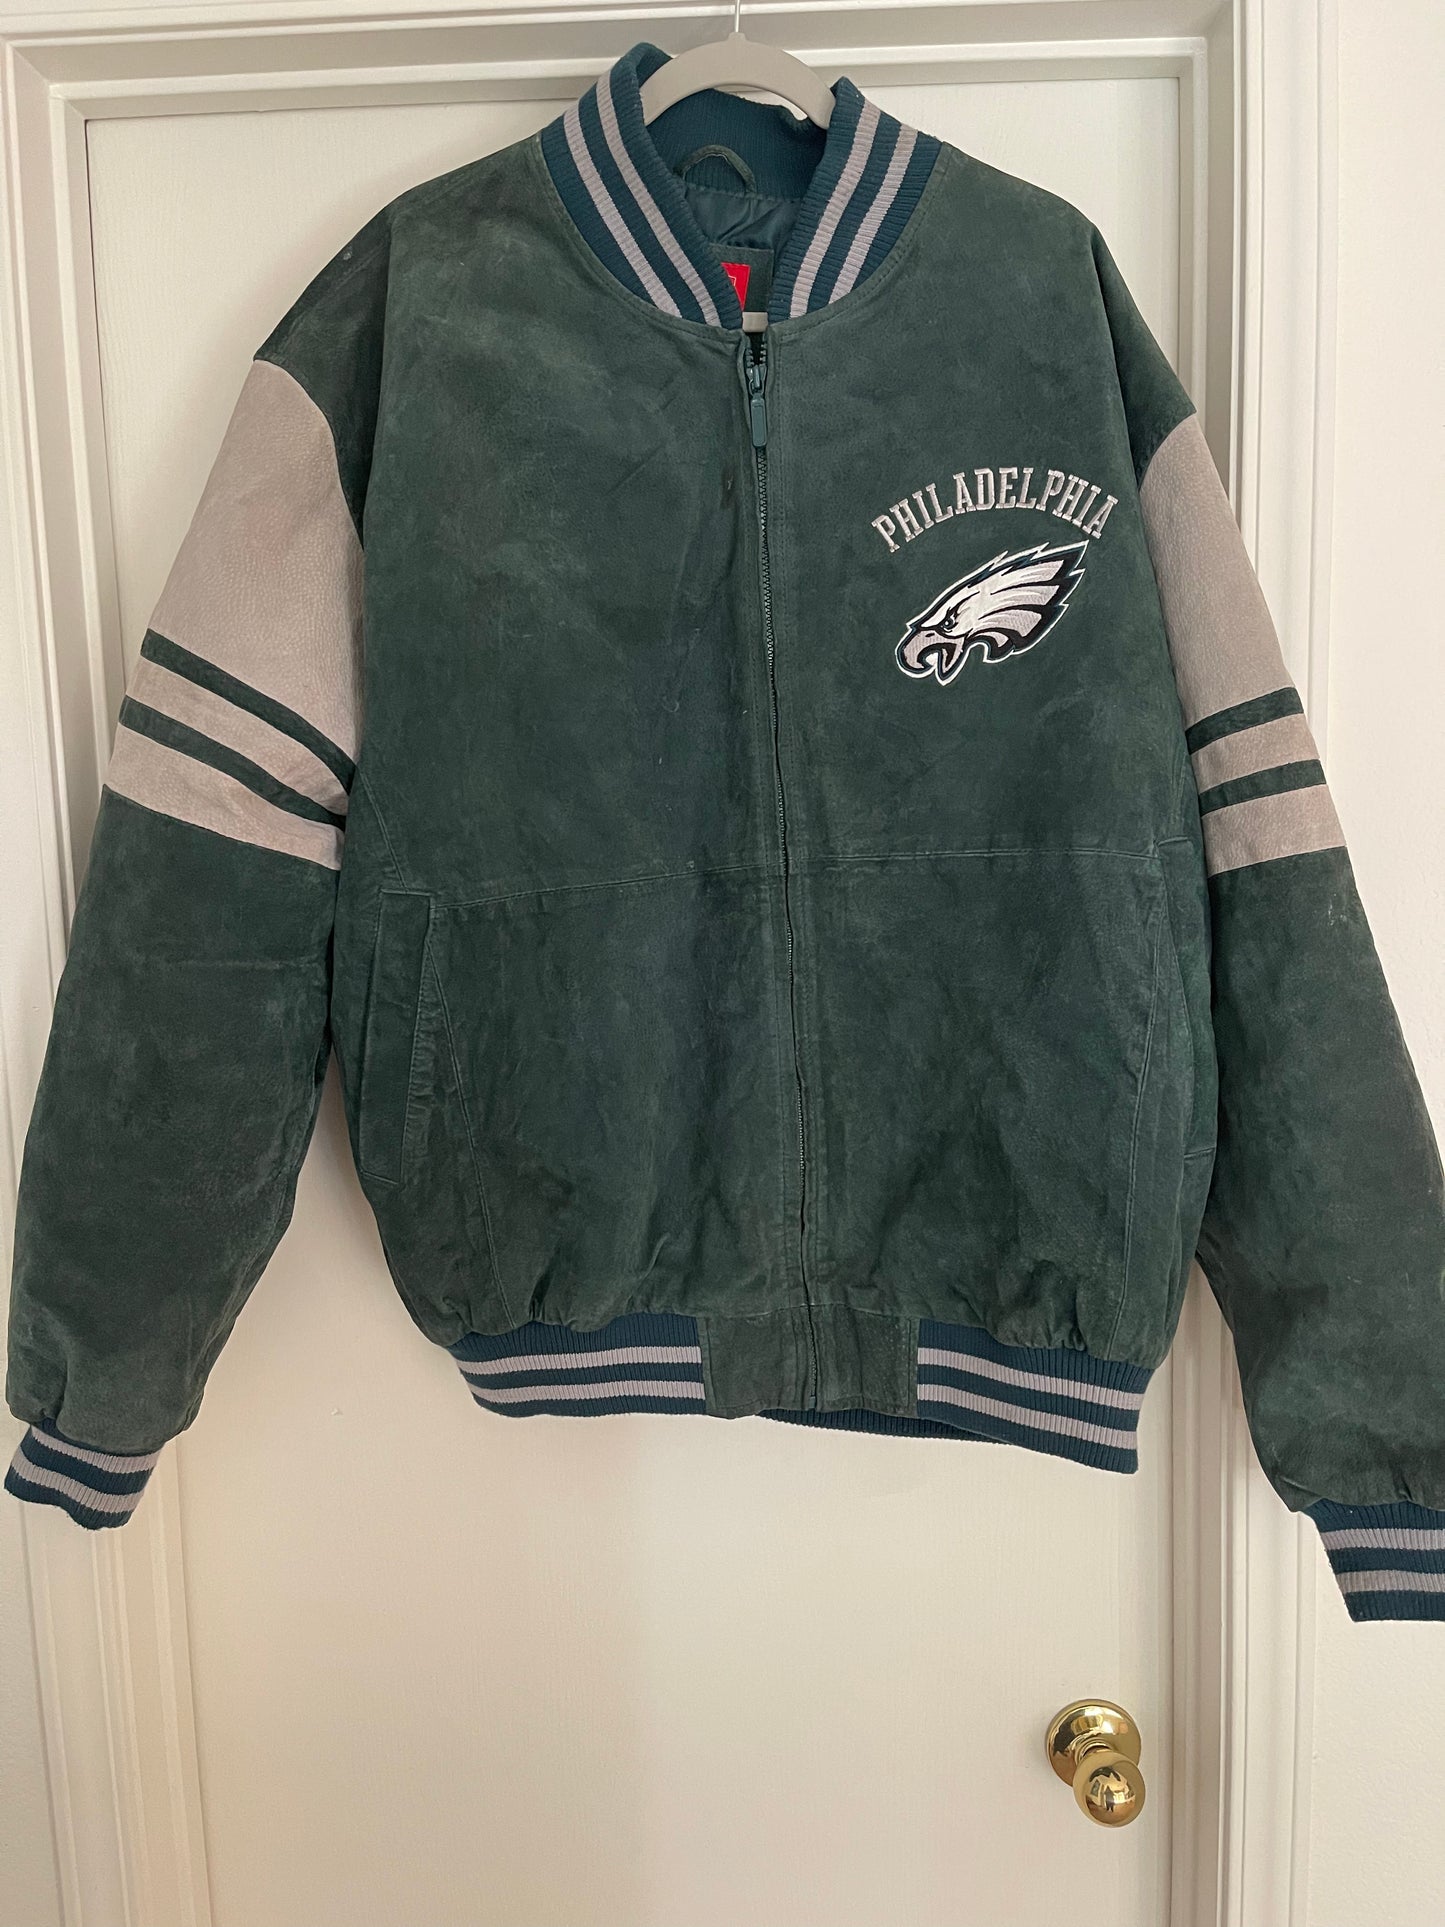 EDP’s Eagles suede jacket 2X